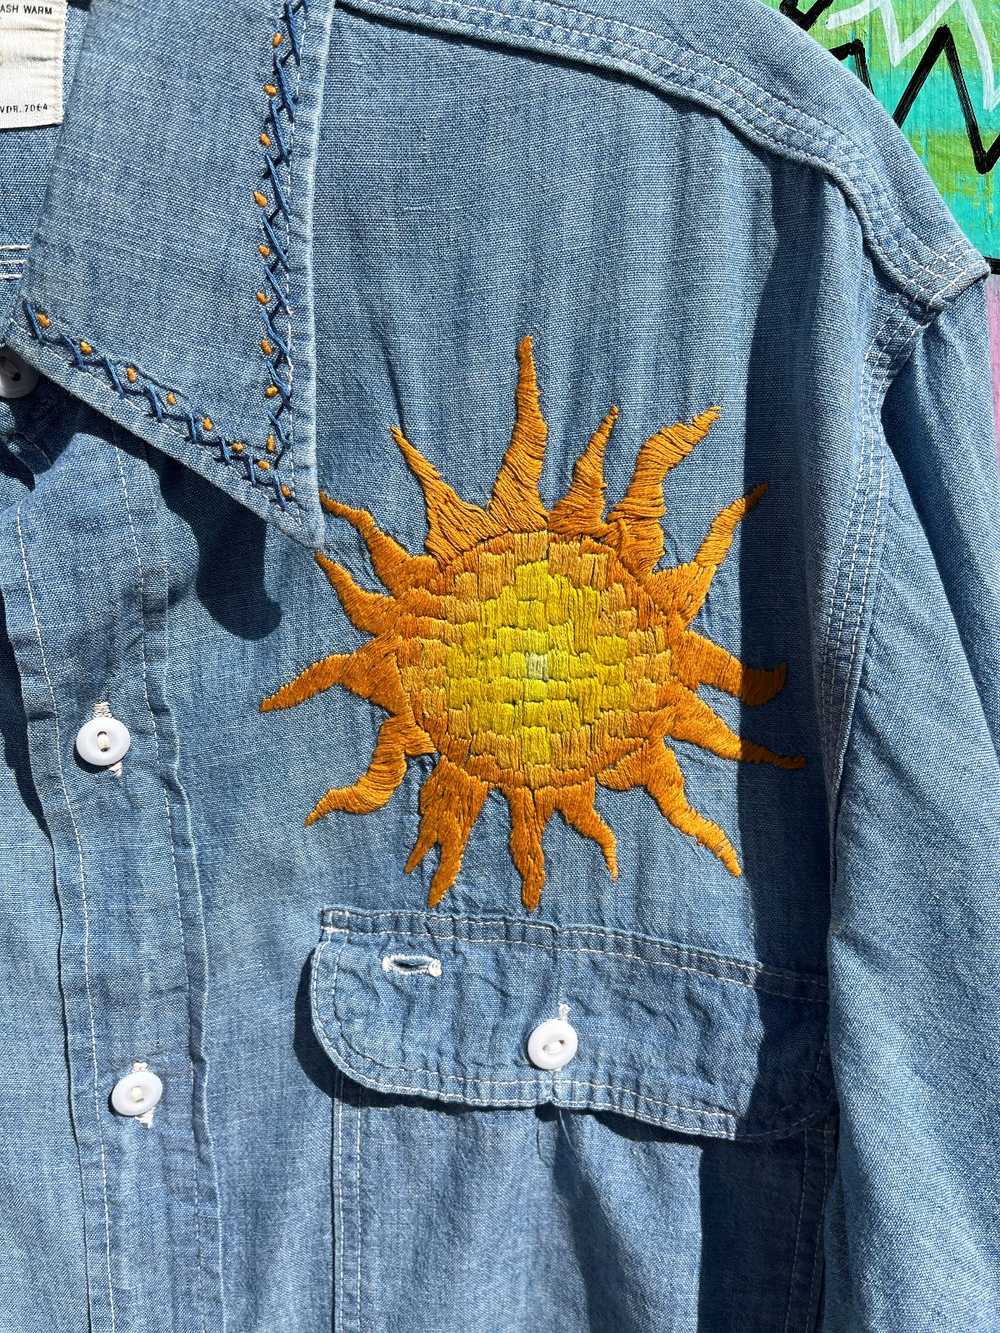 *AS-IS* 1970S EMBROIDERED SUN DESIGN BUTTON UP CH… - image 4